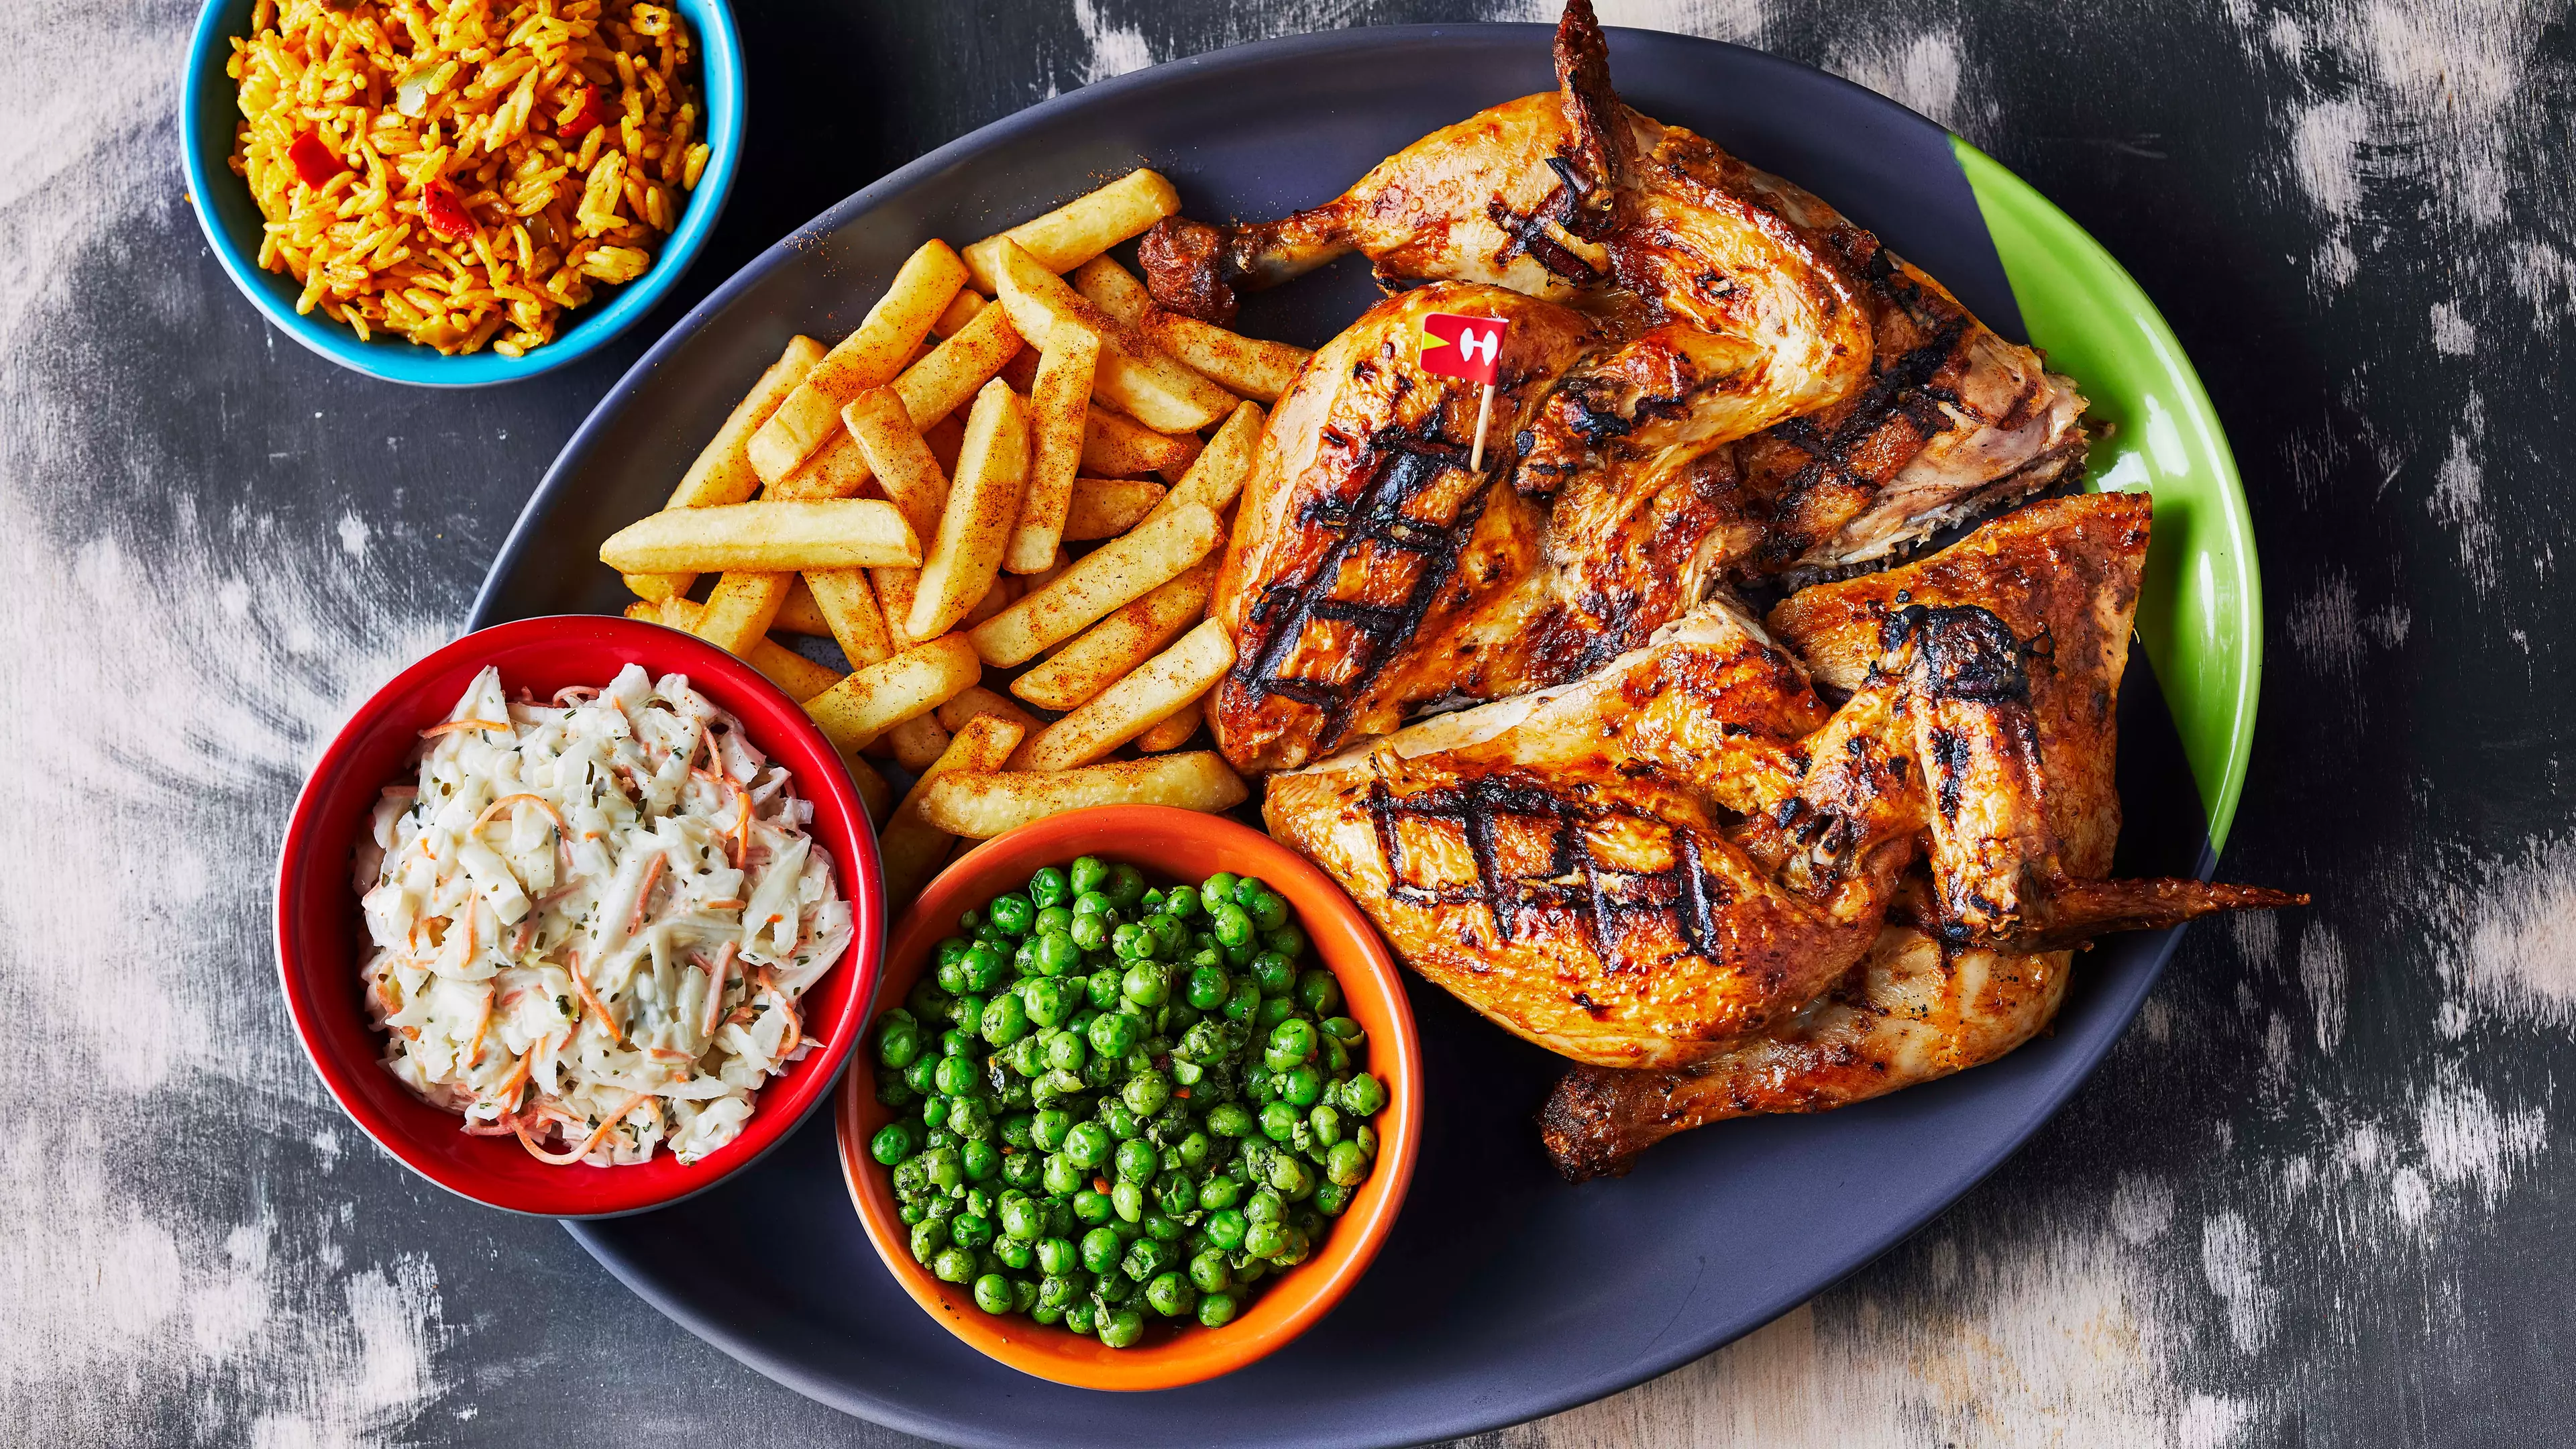 Nando's Announces 10 Eat-In Restaurants To Reopen On 8 July